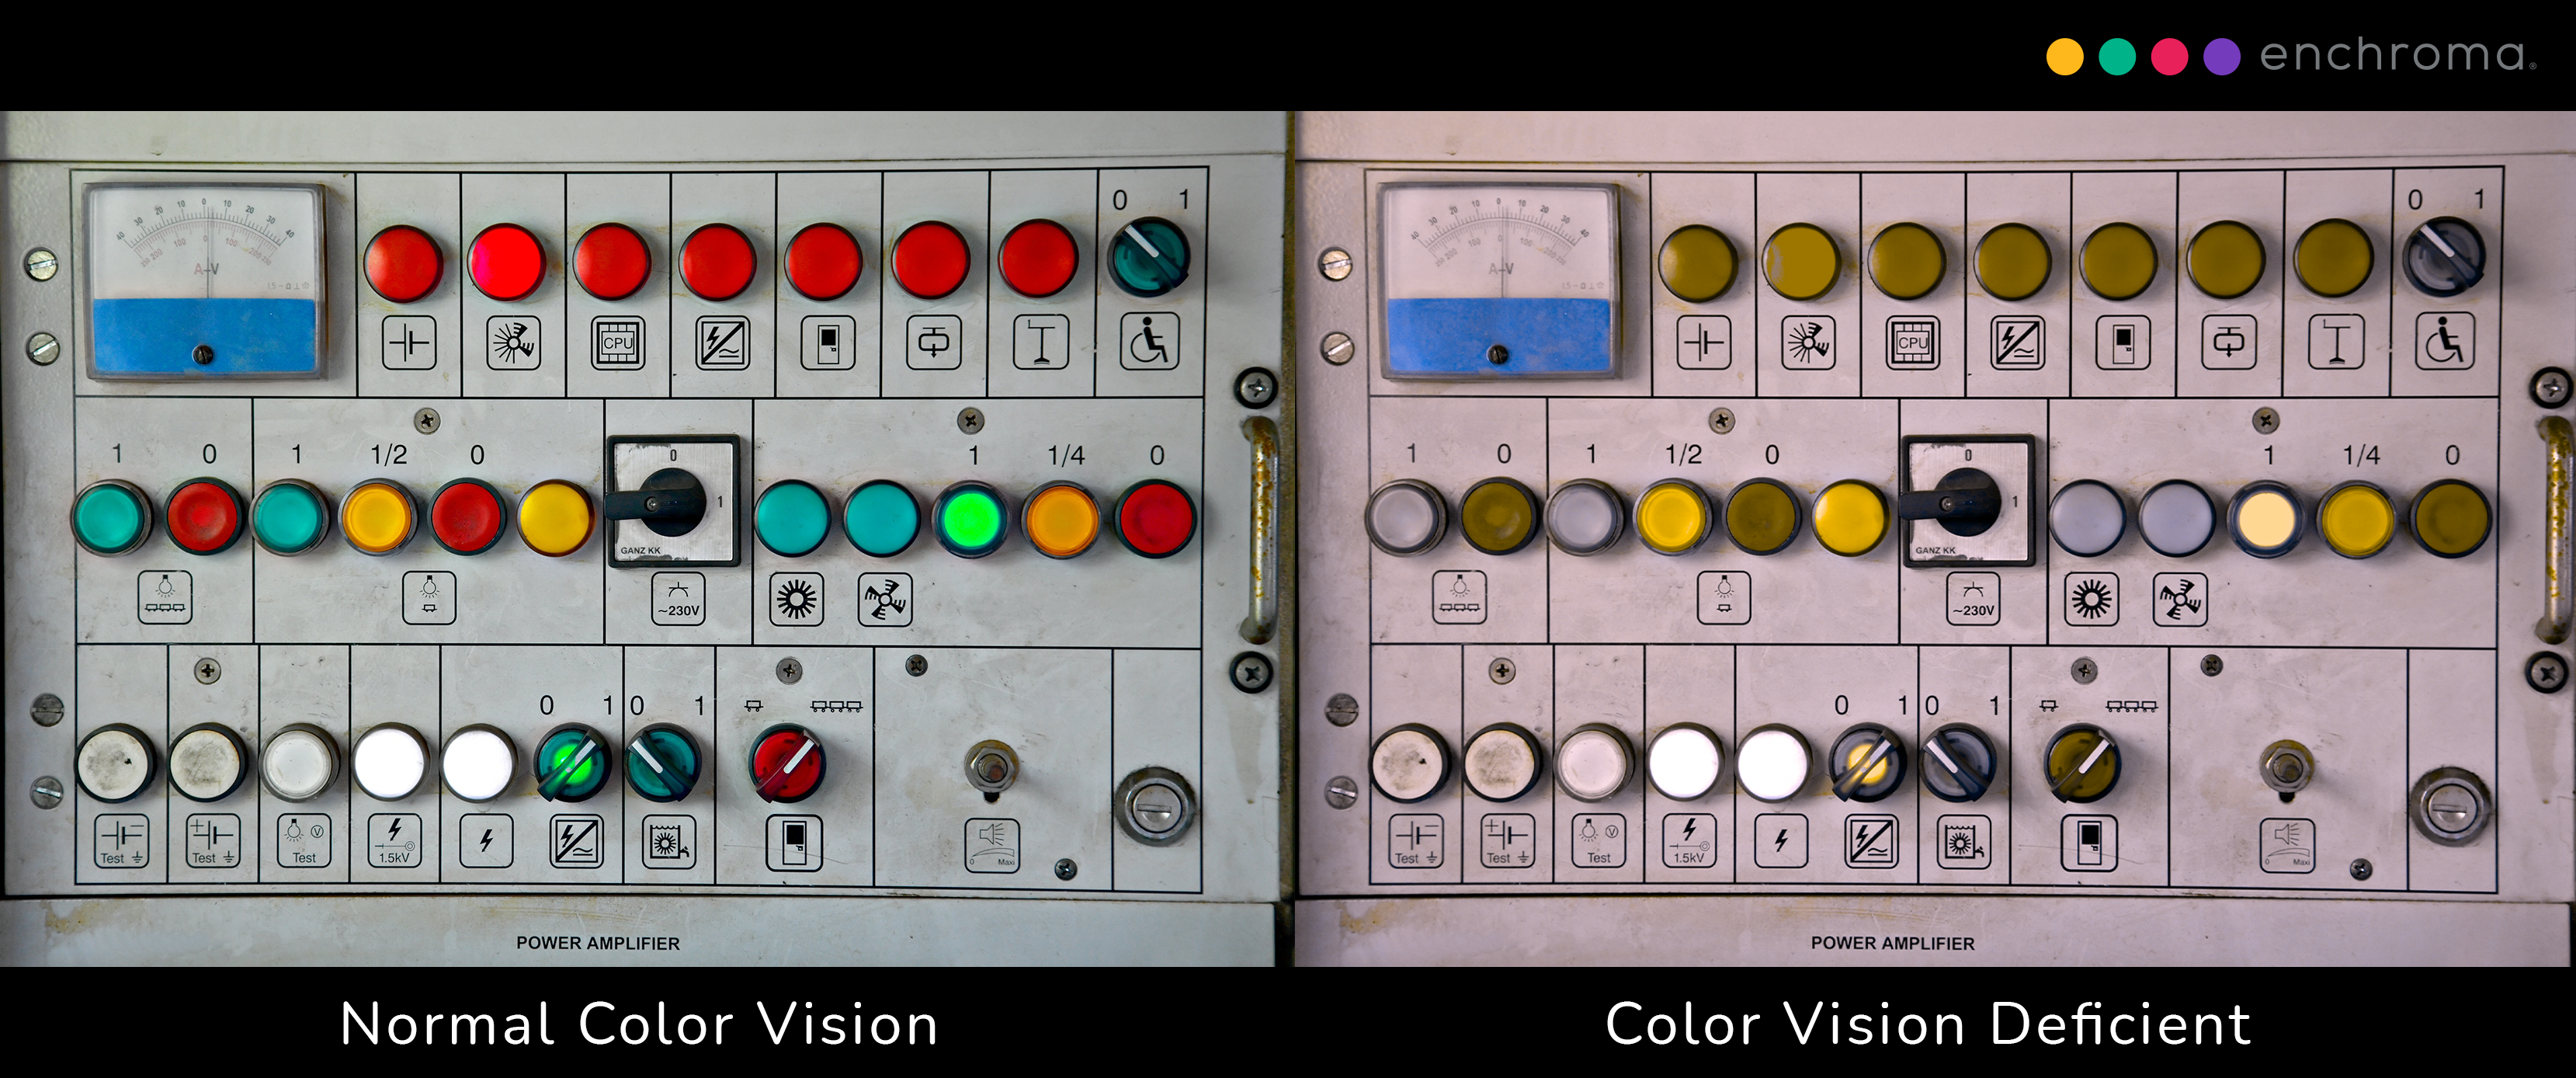 Colorful Control Panel Buttons: Color Blind View vs. Normal View